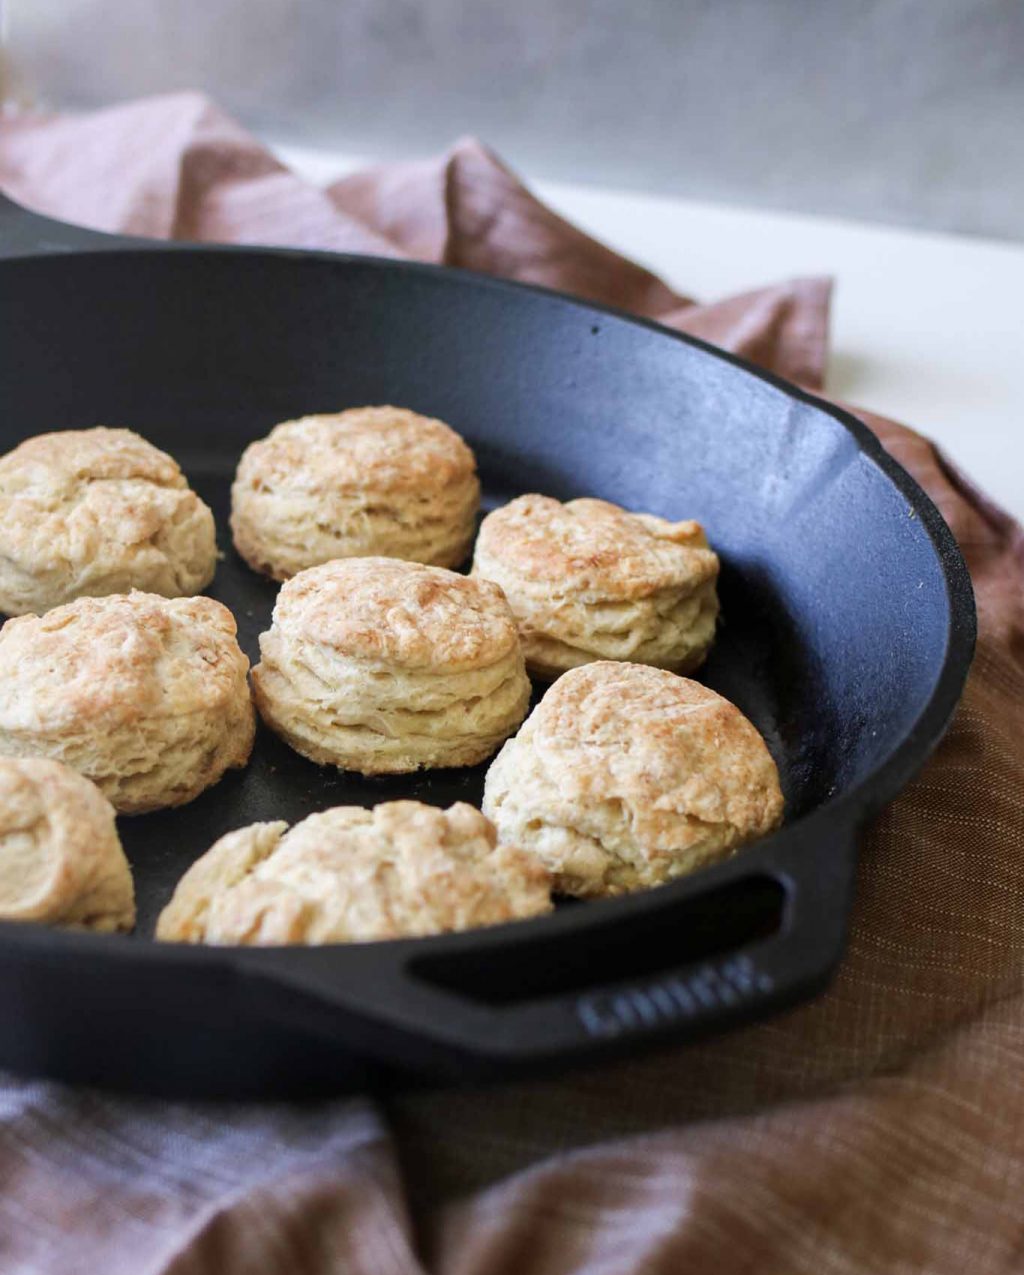 Cast iron pan full of cooked sourdough biscuits